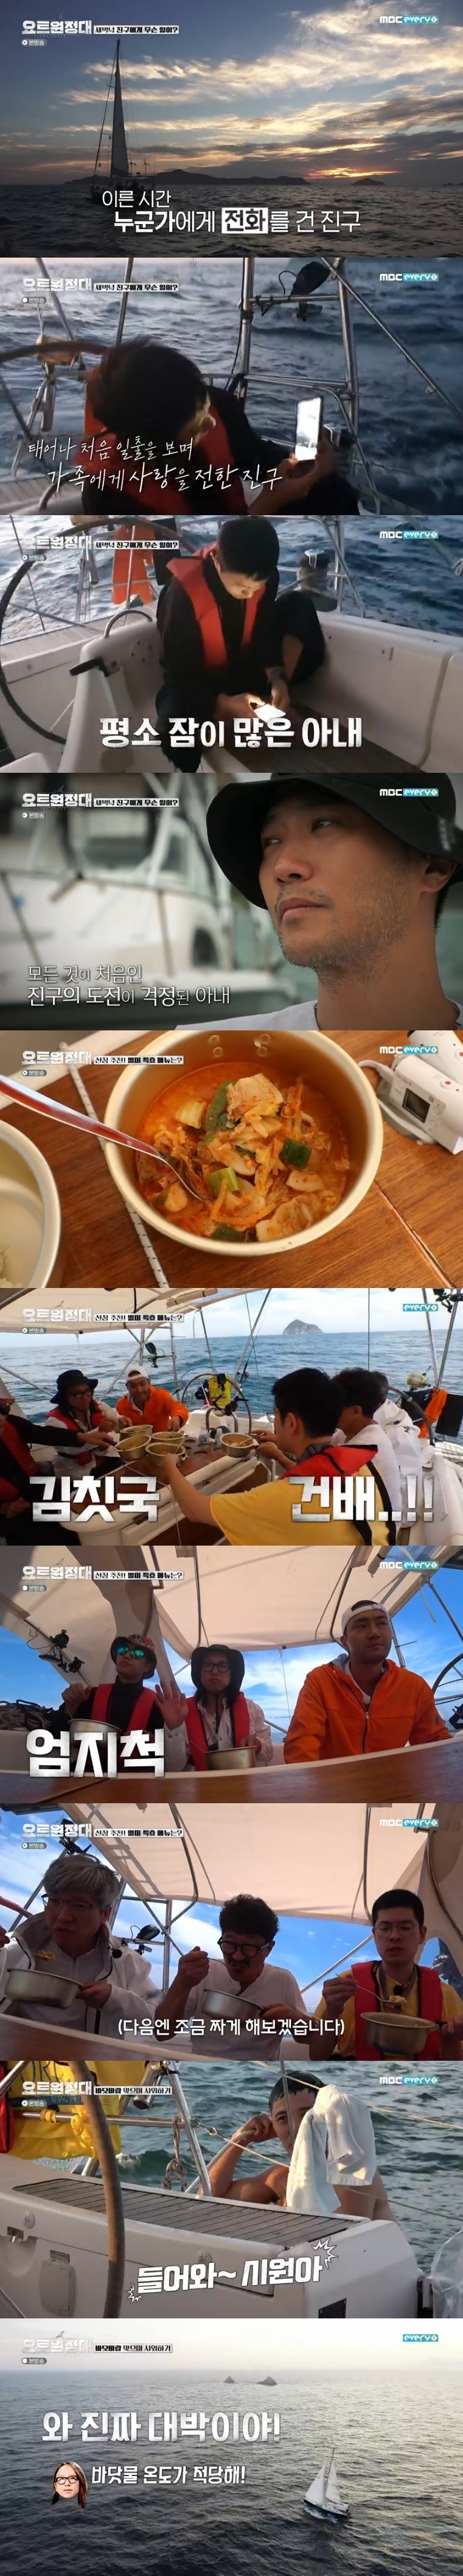 In MBC Everlon entertainment program yacht Expedition broadcasted on the afternoon of the 24th, Crewes such as Jin Goo, Choi Siwon, Chang Kiha, Song Ho Jun and Kim Seung-jin were the Embarkation for Cythera toward Pacific Ocean.Yacht Expedition is a documentary entertainment program that shows the process of challenging the Pacific Ocean voyage by four men who dreamed of adventure.The members began their true adventure and felt various emotions.Crewes were hit by Danger before The Embarkation for Cythera.It was worrying that Choi Siwon was looking for a hospital due to weather deterioration such as strong rain in strong winds.Here, Jin Goo said, I think dark and dark blue waves are just rolling, raining, and I think Im doing more of that imagination.Nevertheless, the crew overcame Danger, who gathered in Geoje Island for Haru Late The Embarkation for Cythera.Fearful, Jin Goo said, We have to get through it. Choi Siwon also joined the hospital after being prescribed medicine.Finally, the yacht, who was loaded with Crewes, was The Embarkation for Cythera; Summertime for Pacific Ocean Southern Cross began.Those who shared their life jackets were laughing with worry, saying, It really started, I started.Choi Siwon was worried about seasickness from the beginning of the voyage, and others such as Chang Kiha and Song Ho Jun gradually felt motion sickness.The first meal was Chungmu Kimbap, which was bought by Jin Goo. Chang Kiha laughed as he inhaled the storm in the shape of a superhuman (?).Jin Goo claimed to be the Bunger maker on yacht.The crew set their first watch sequence with scissors and rocks; Captain Kim Seung-jin used the interlude to give a warching lecture.If you stare at one place, you may have an optical illusion, so you have to turn around 360 degrees often.On the first night, Jin Goo put something on the wall: My pride and all of me, with a family photo posted, Jin Goo saw the sunrise during the early morning watch.I made a video call to my most missed family. Jin Goo smiled for his wife, who was worried. Its the first time Ive seen sunrise for 41 years.Jin Goo said, I sent a picture of the sunrise, but my wife is really asleep. I will be sleeping at about 4 am. I was worried about my being awake.I have a reply saying I love and respect you, I was so grateful, he said.The next morning Kim Seung-jin cooked kim chitguk for the struggling crew, who said: This is going to be good for getting inside, because Ive got sick.The crew shouted a toast with a kimchi soup, everyone inhaled deliciously, and favorable comments such as Dissipation is gone, Kimchiguk always has good memories and I am relieved.Members showed a gradual adaptation: Jin Goo was surprised by the shower with seawater in a small bath on yacht.Song Ho-joon took over Baton and was satisfied that the sea temperature is just right. Those who adapt to their life in yacht are looking forward to seeing what kind of navigation aircraft they will show in the future.